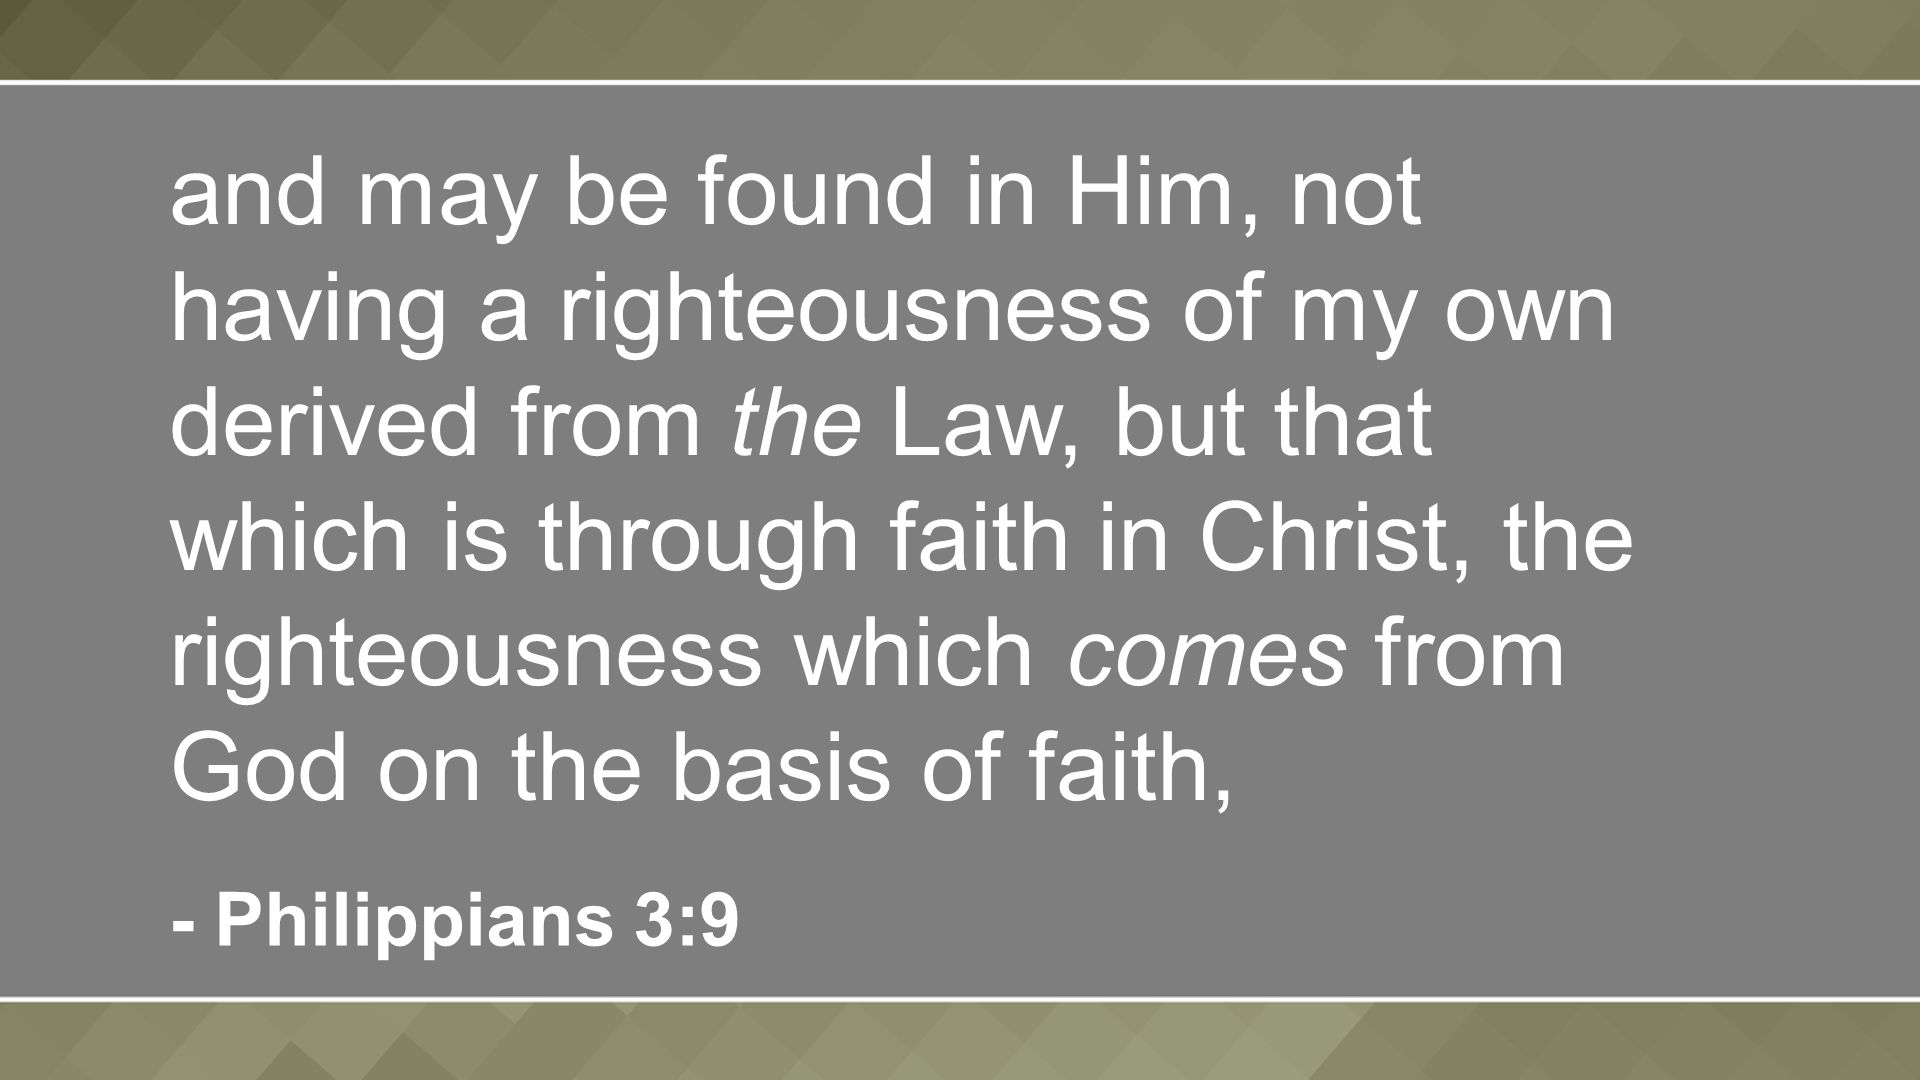 and may be found in Him, not having a righteousness of my own derived from the Law, but that which is through faith in Christ, the righteousness which comes from God on the basis of faith, - Philippians 3:9